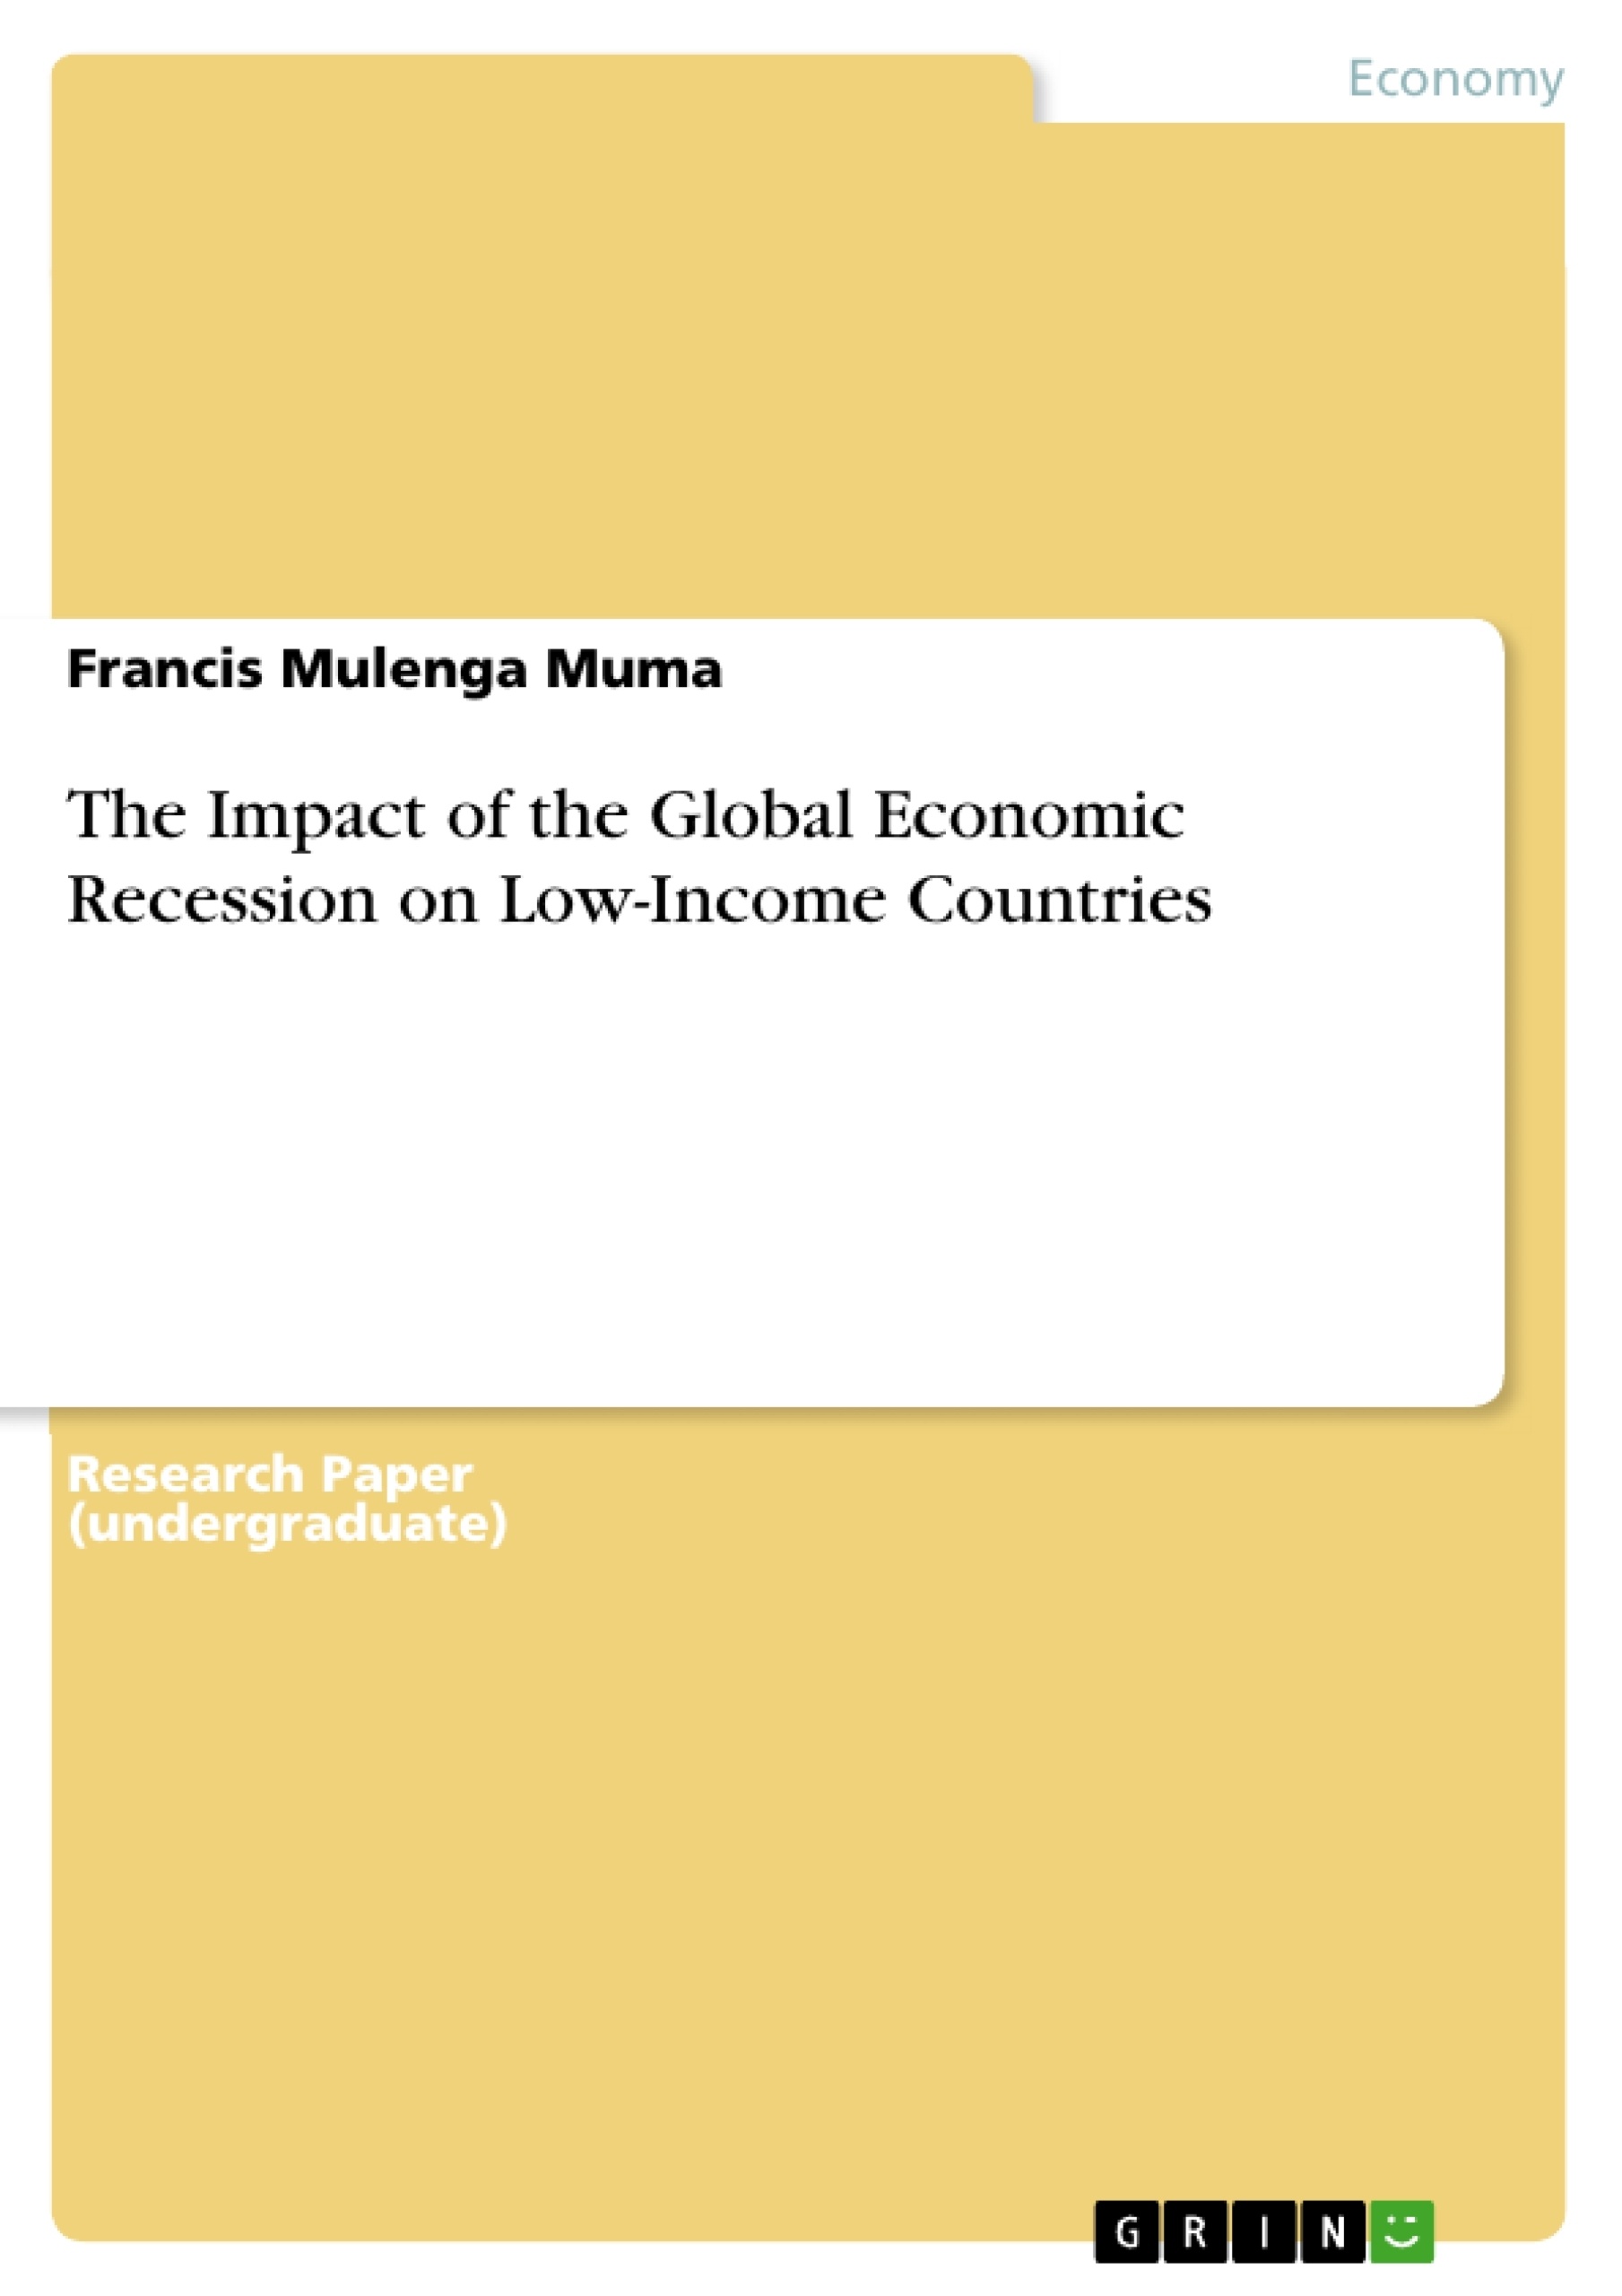 Title: The Impact of the Global Economic Recession on Low-Income Countries